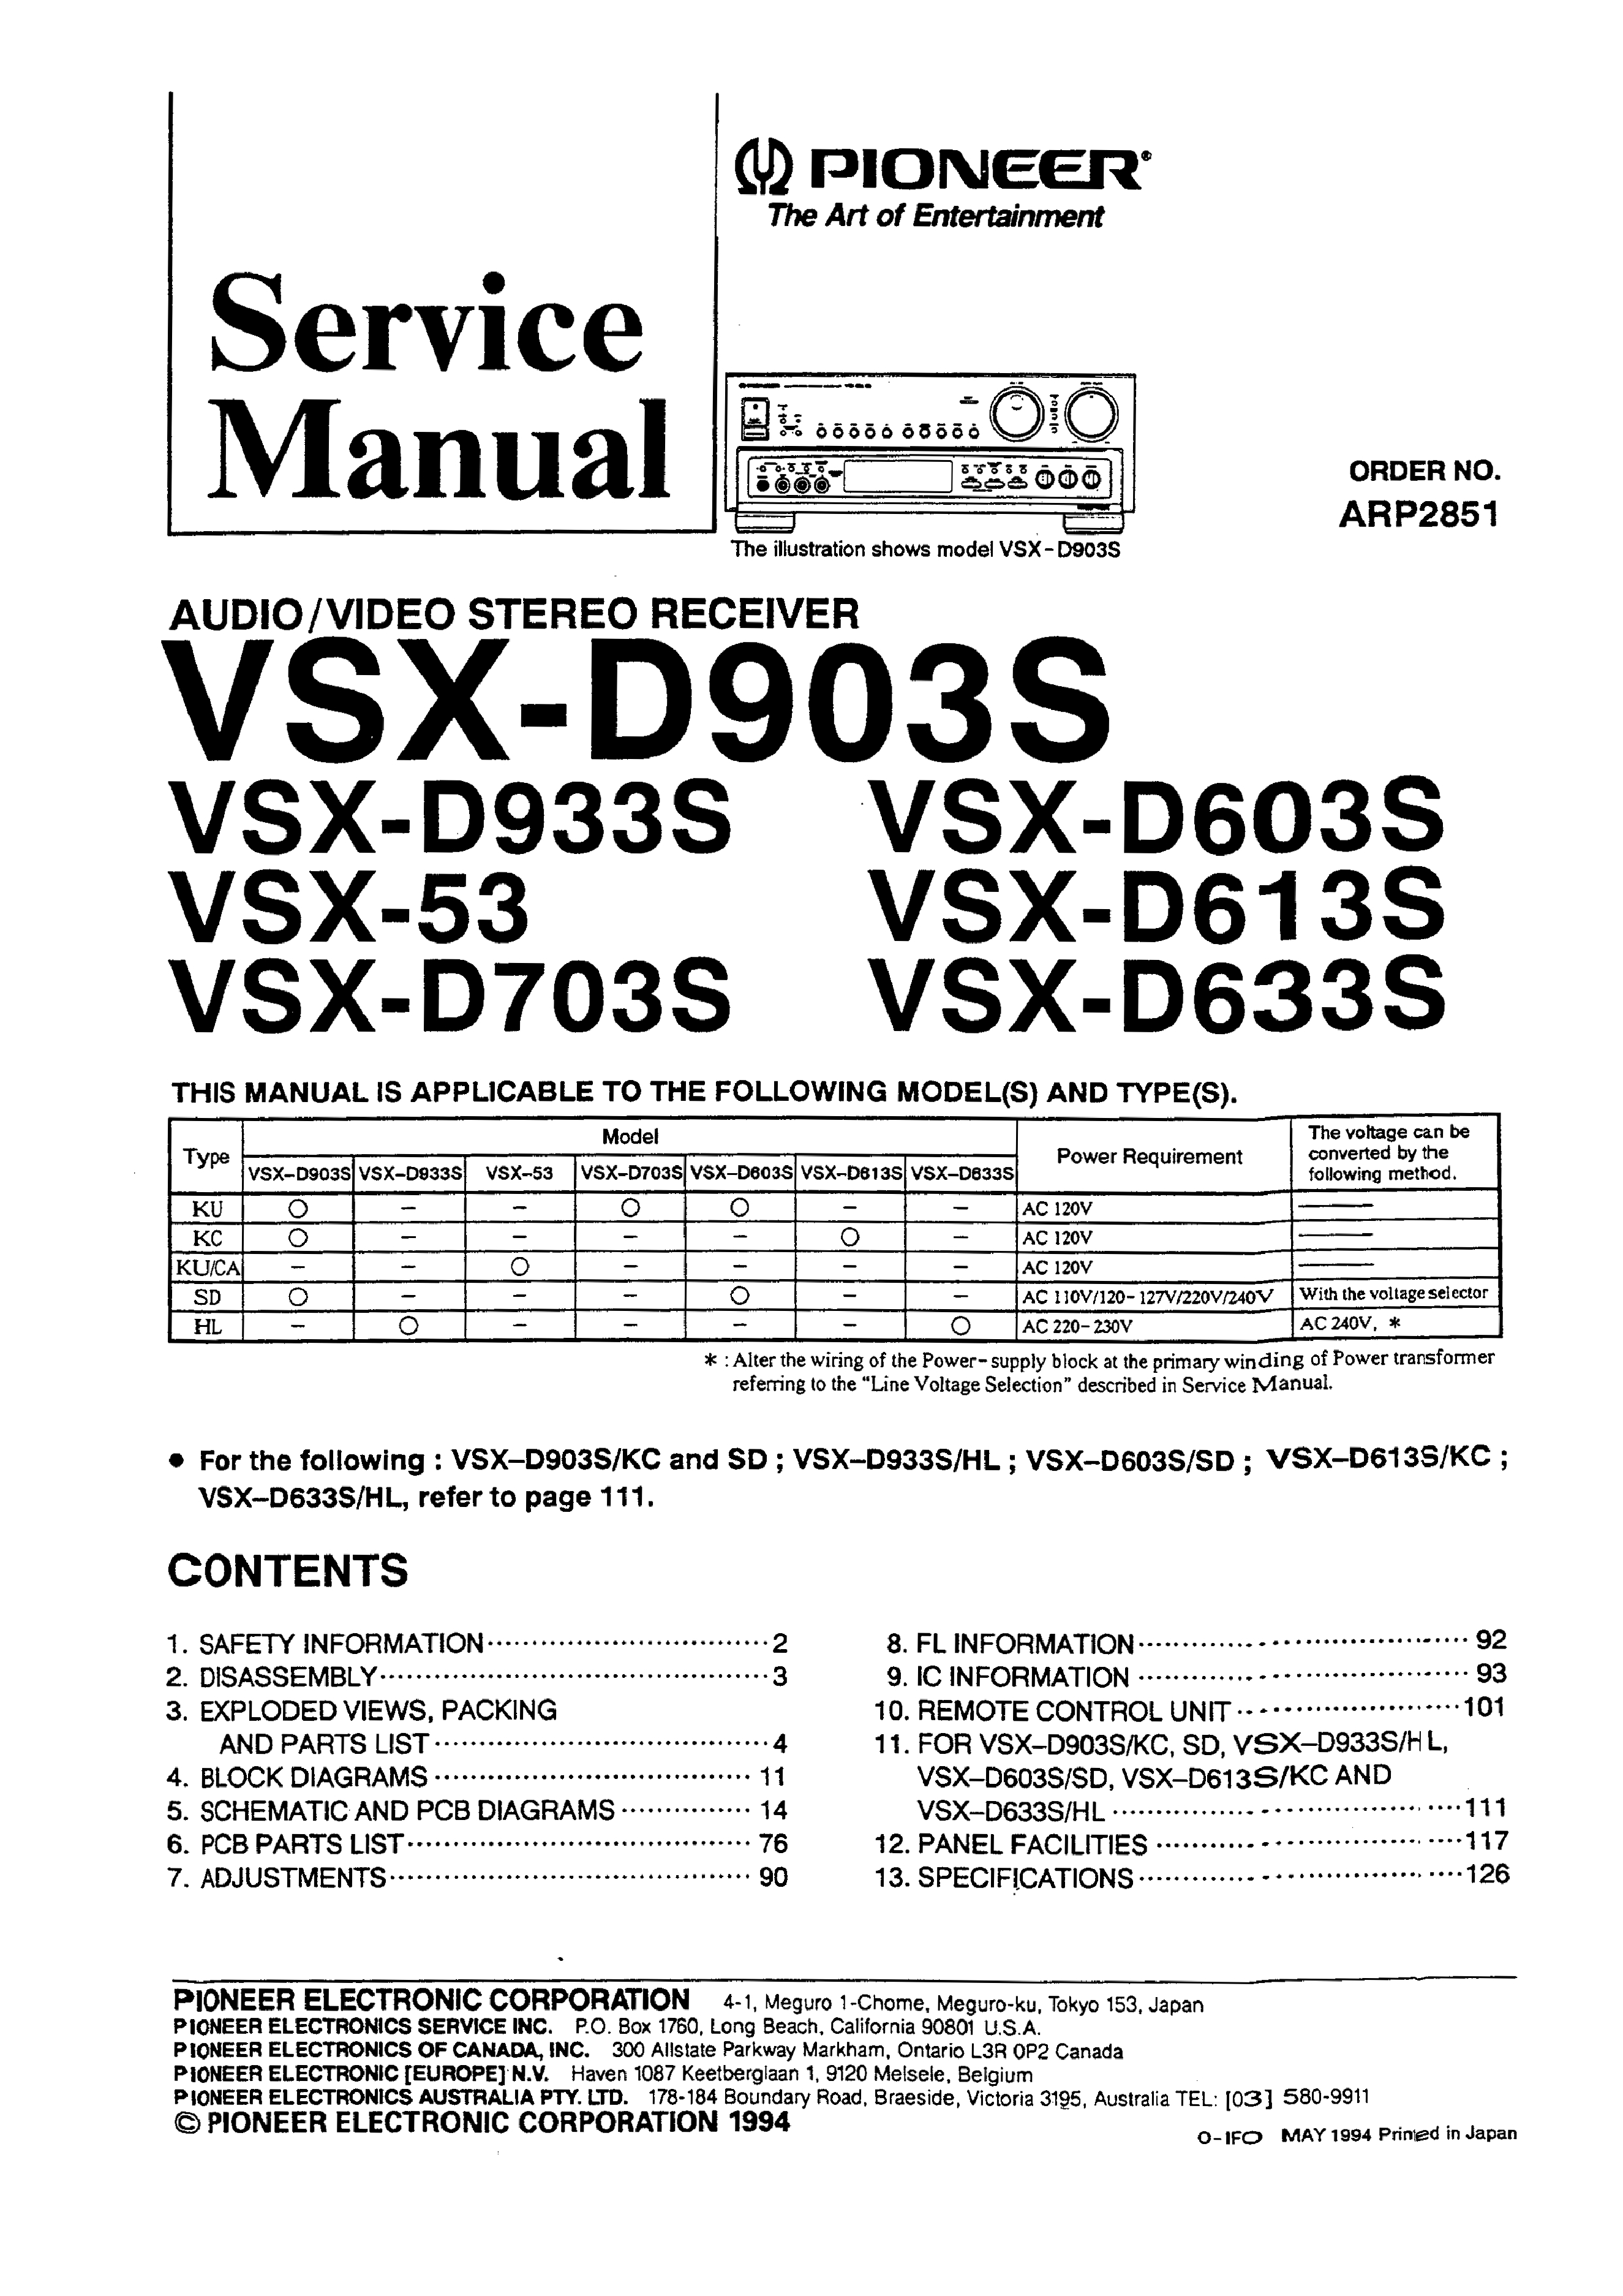 Service Manual for PIONEER VSX-D903S - Download